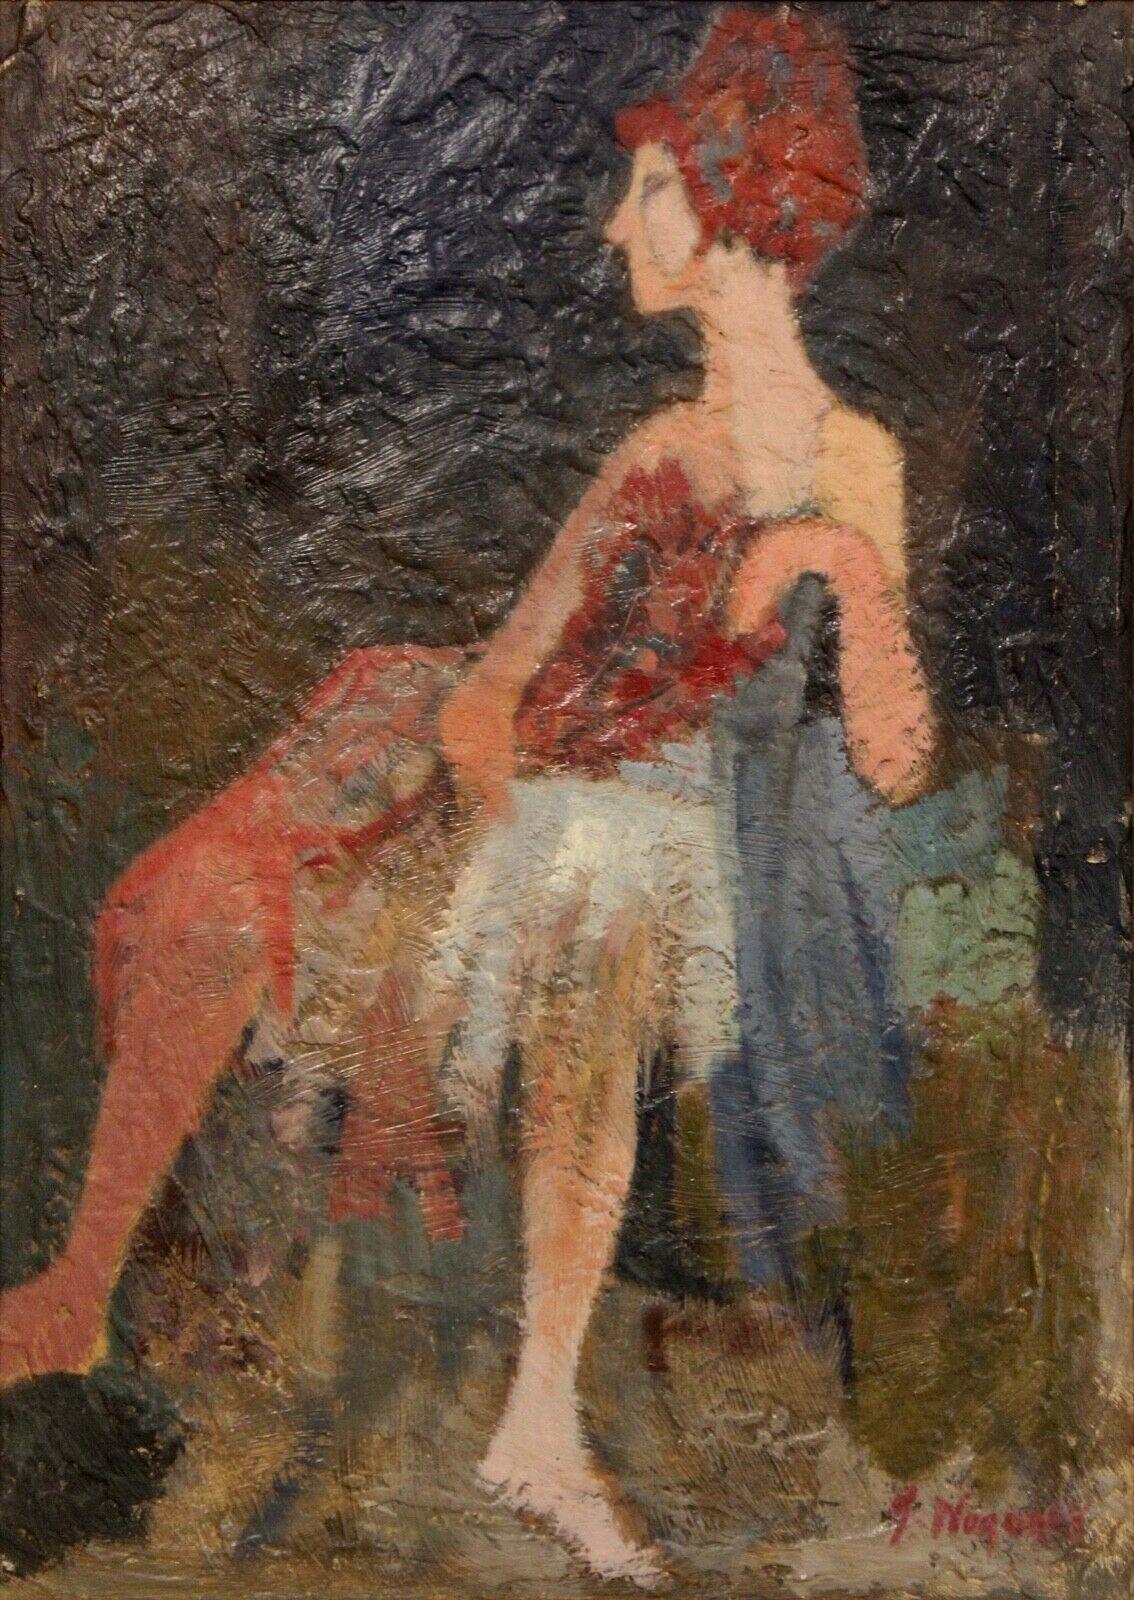 Le Shoppe Too in Michigan is offering an expressive figurative oil painting on canvas depicting an elegant female woman by Janis Wagoner. Dimensions: 15.25 W x 1.5 D x 20.75 H (framed). In very good vintage condition. 
  